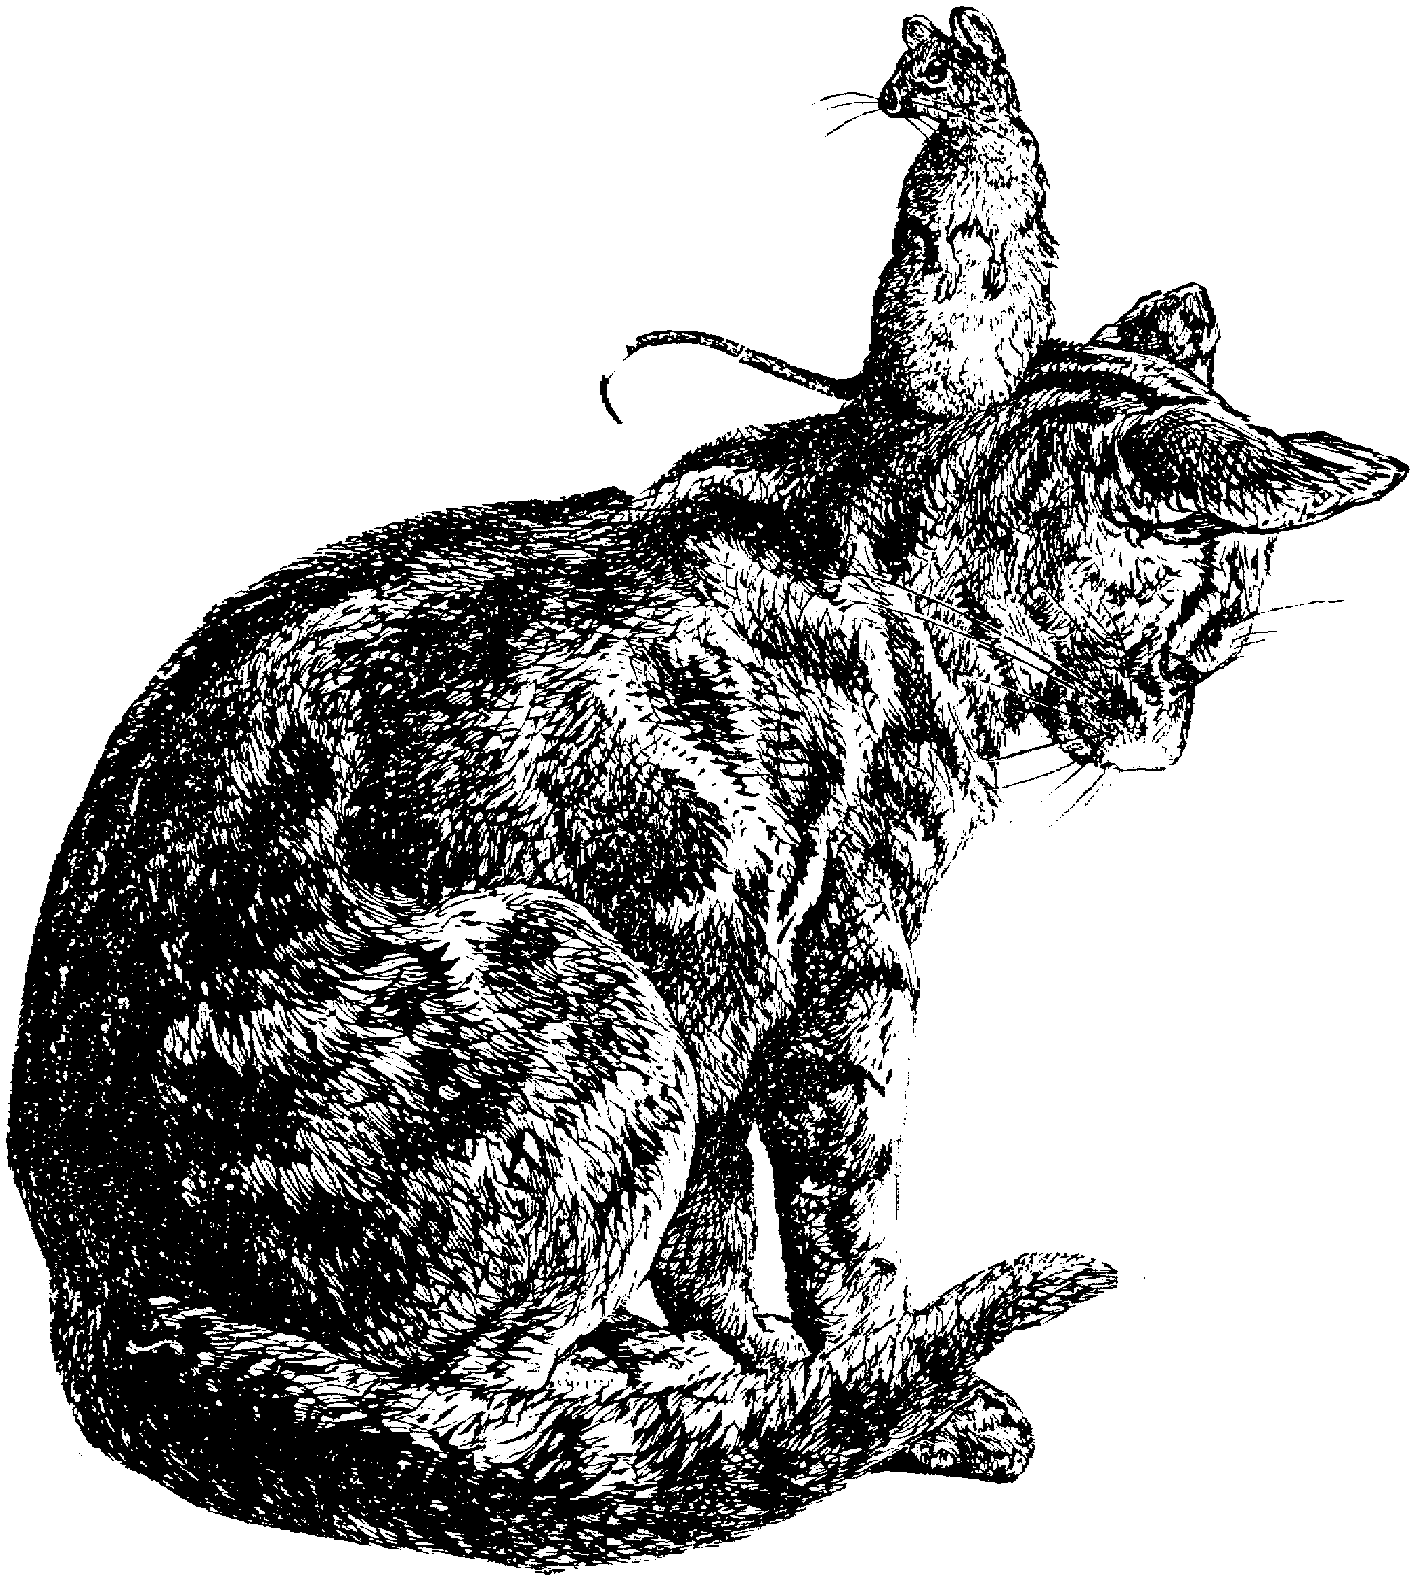 Black and white drawing of small rat sitting on neck of seated tabby cat